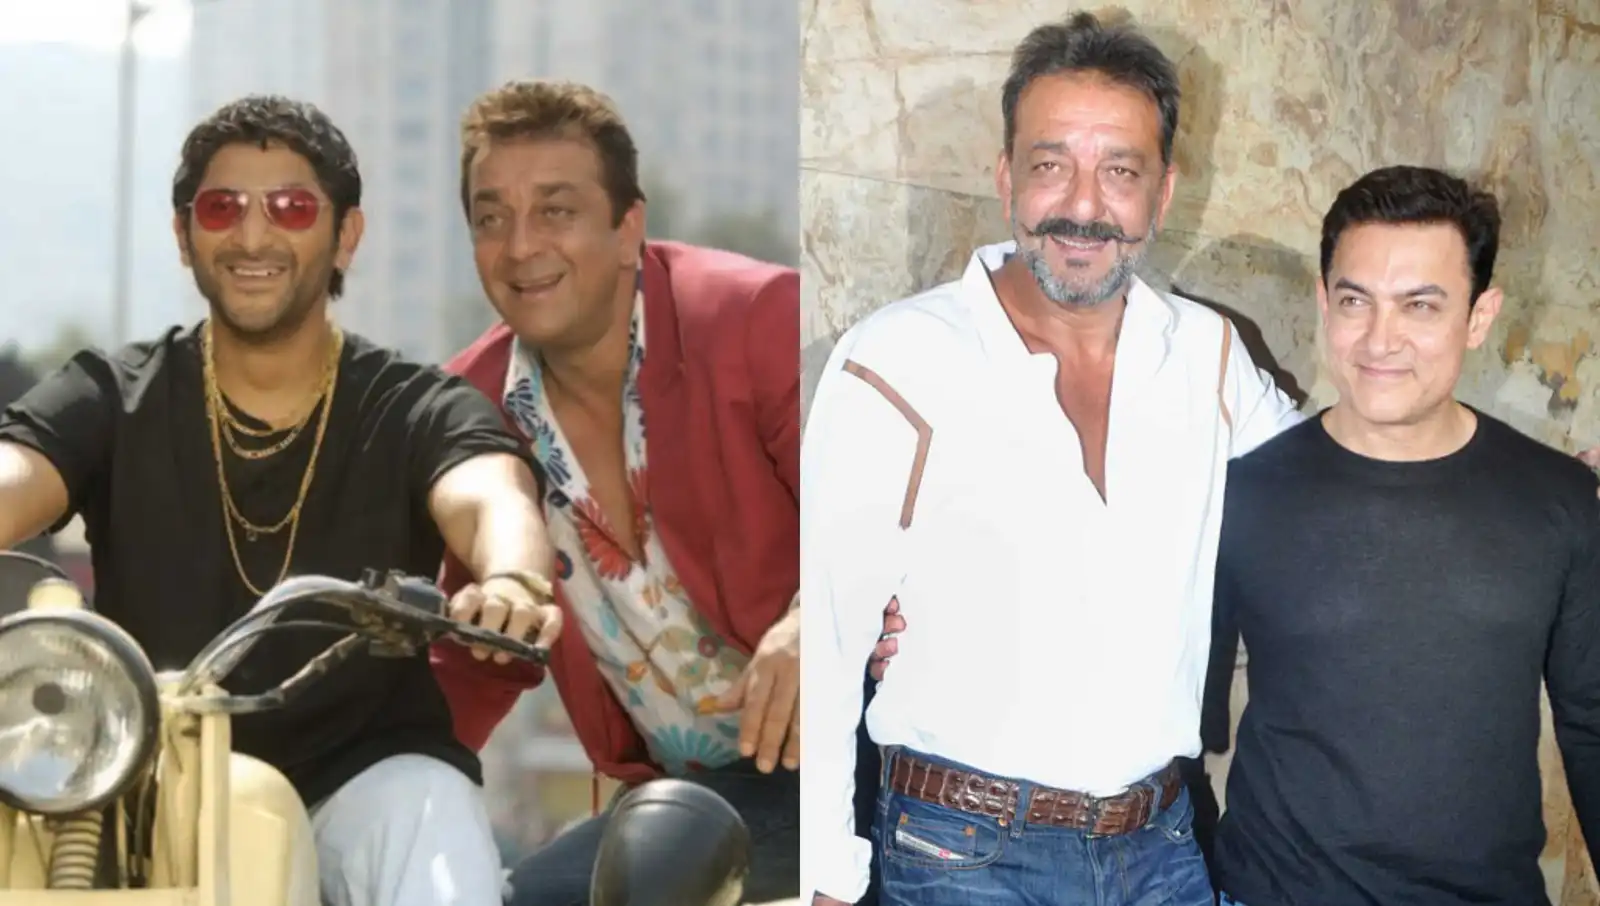 Lage Raho Munna Bhai: From Arshad Warsi re-watching part 1 to Aamir’s planned cameo, fun facts about Sanjay Dutt’s film